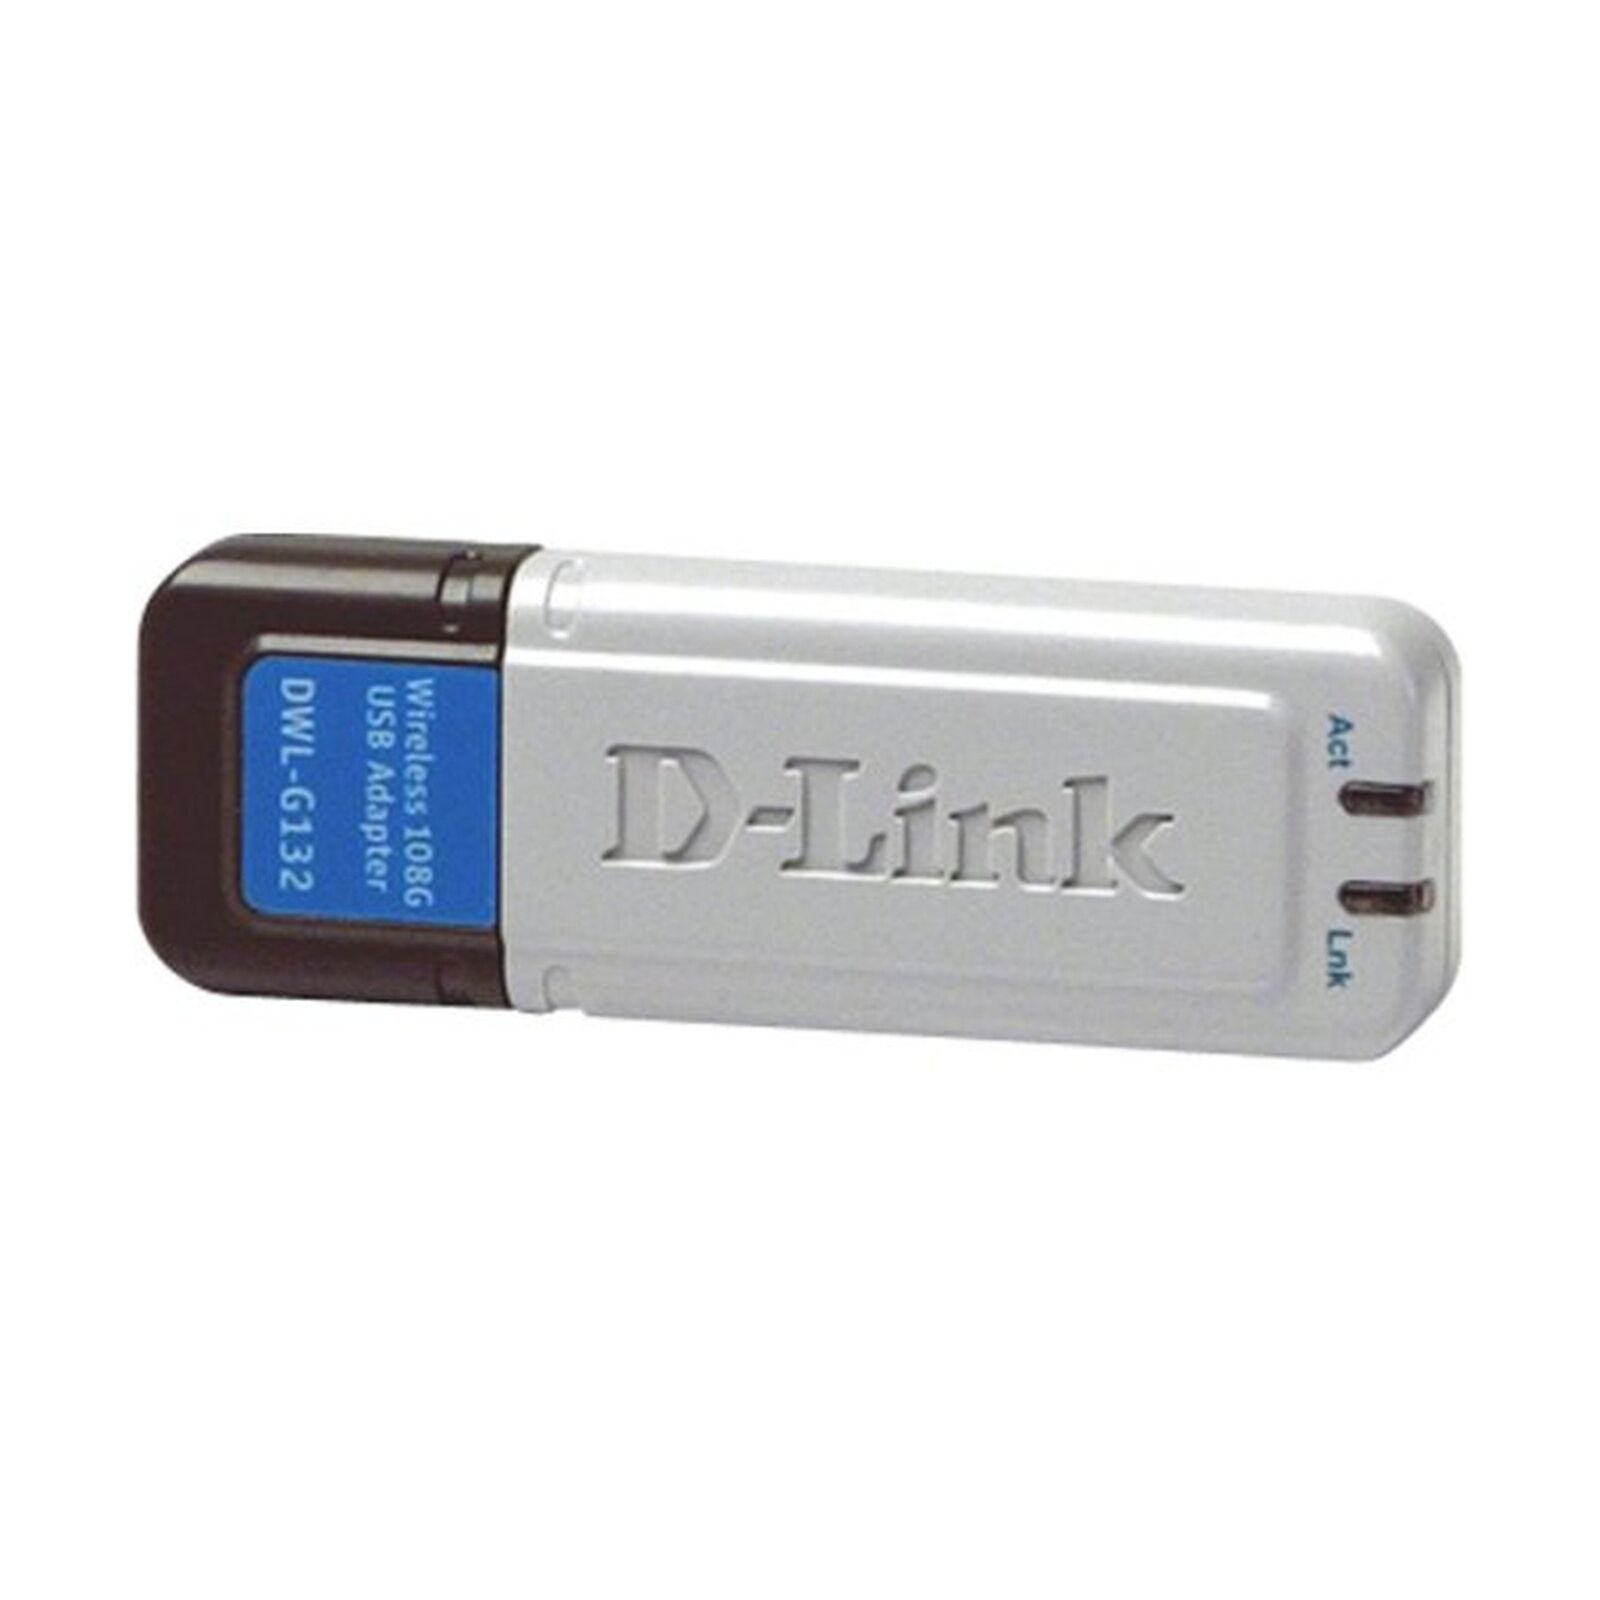 D-Link DWL-G132 Compact Wireless USB 2.0 Adapter, Cradle Included, 802.11g, 1...